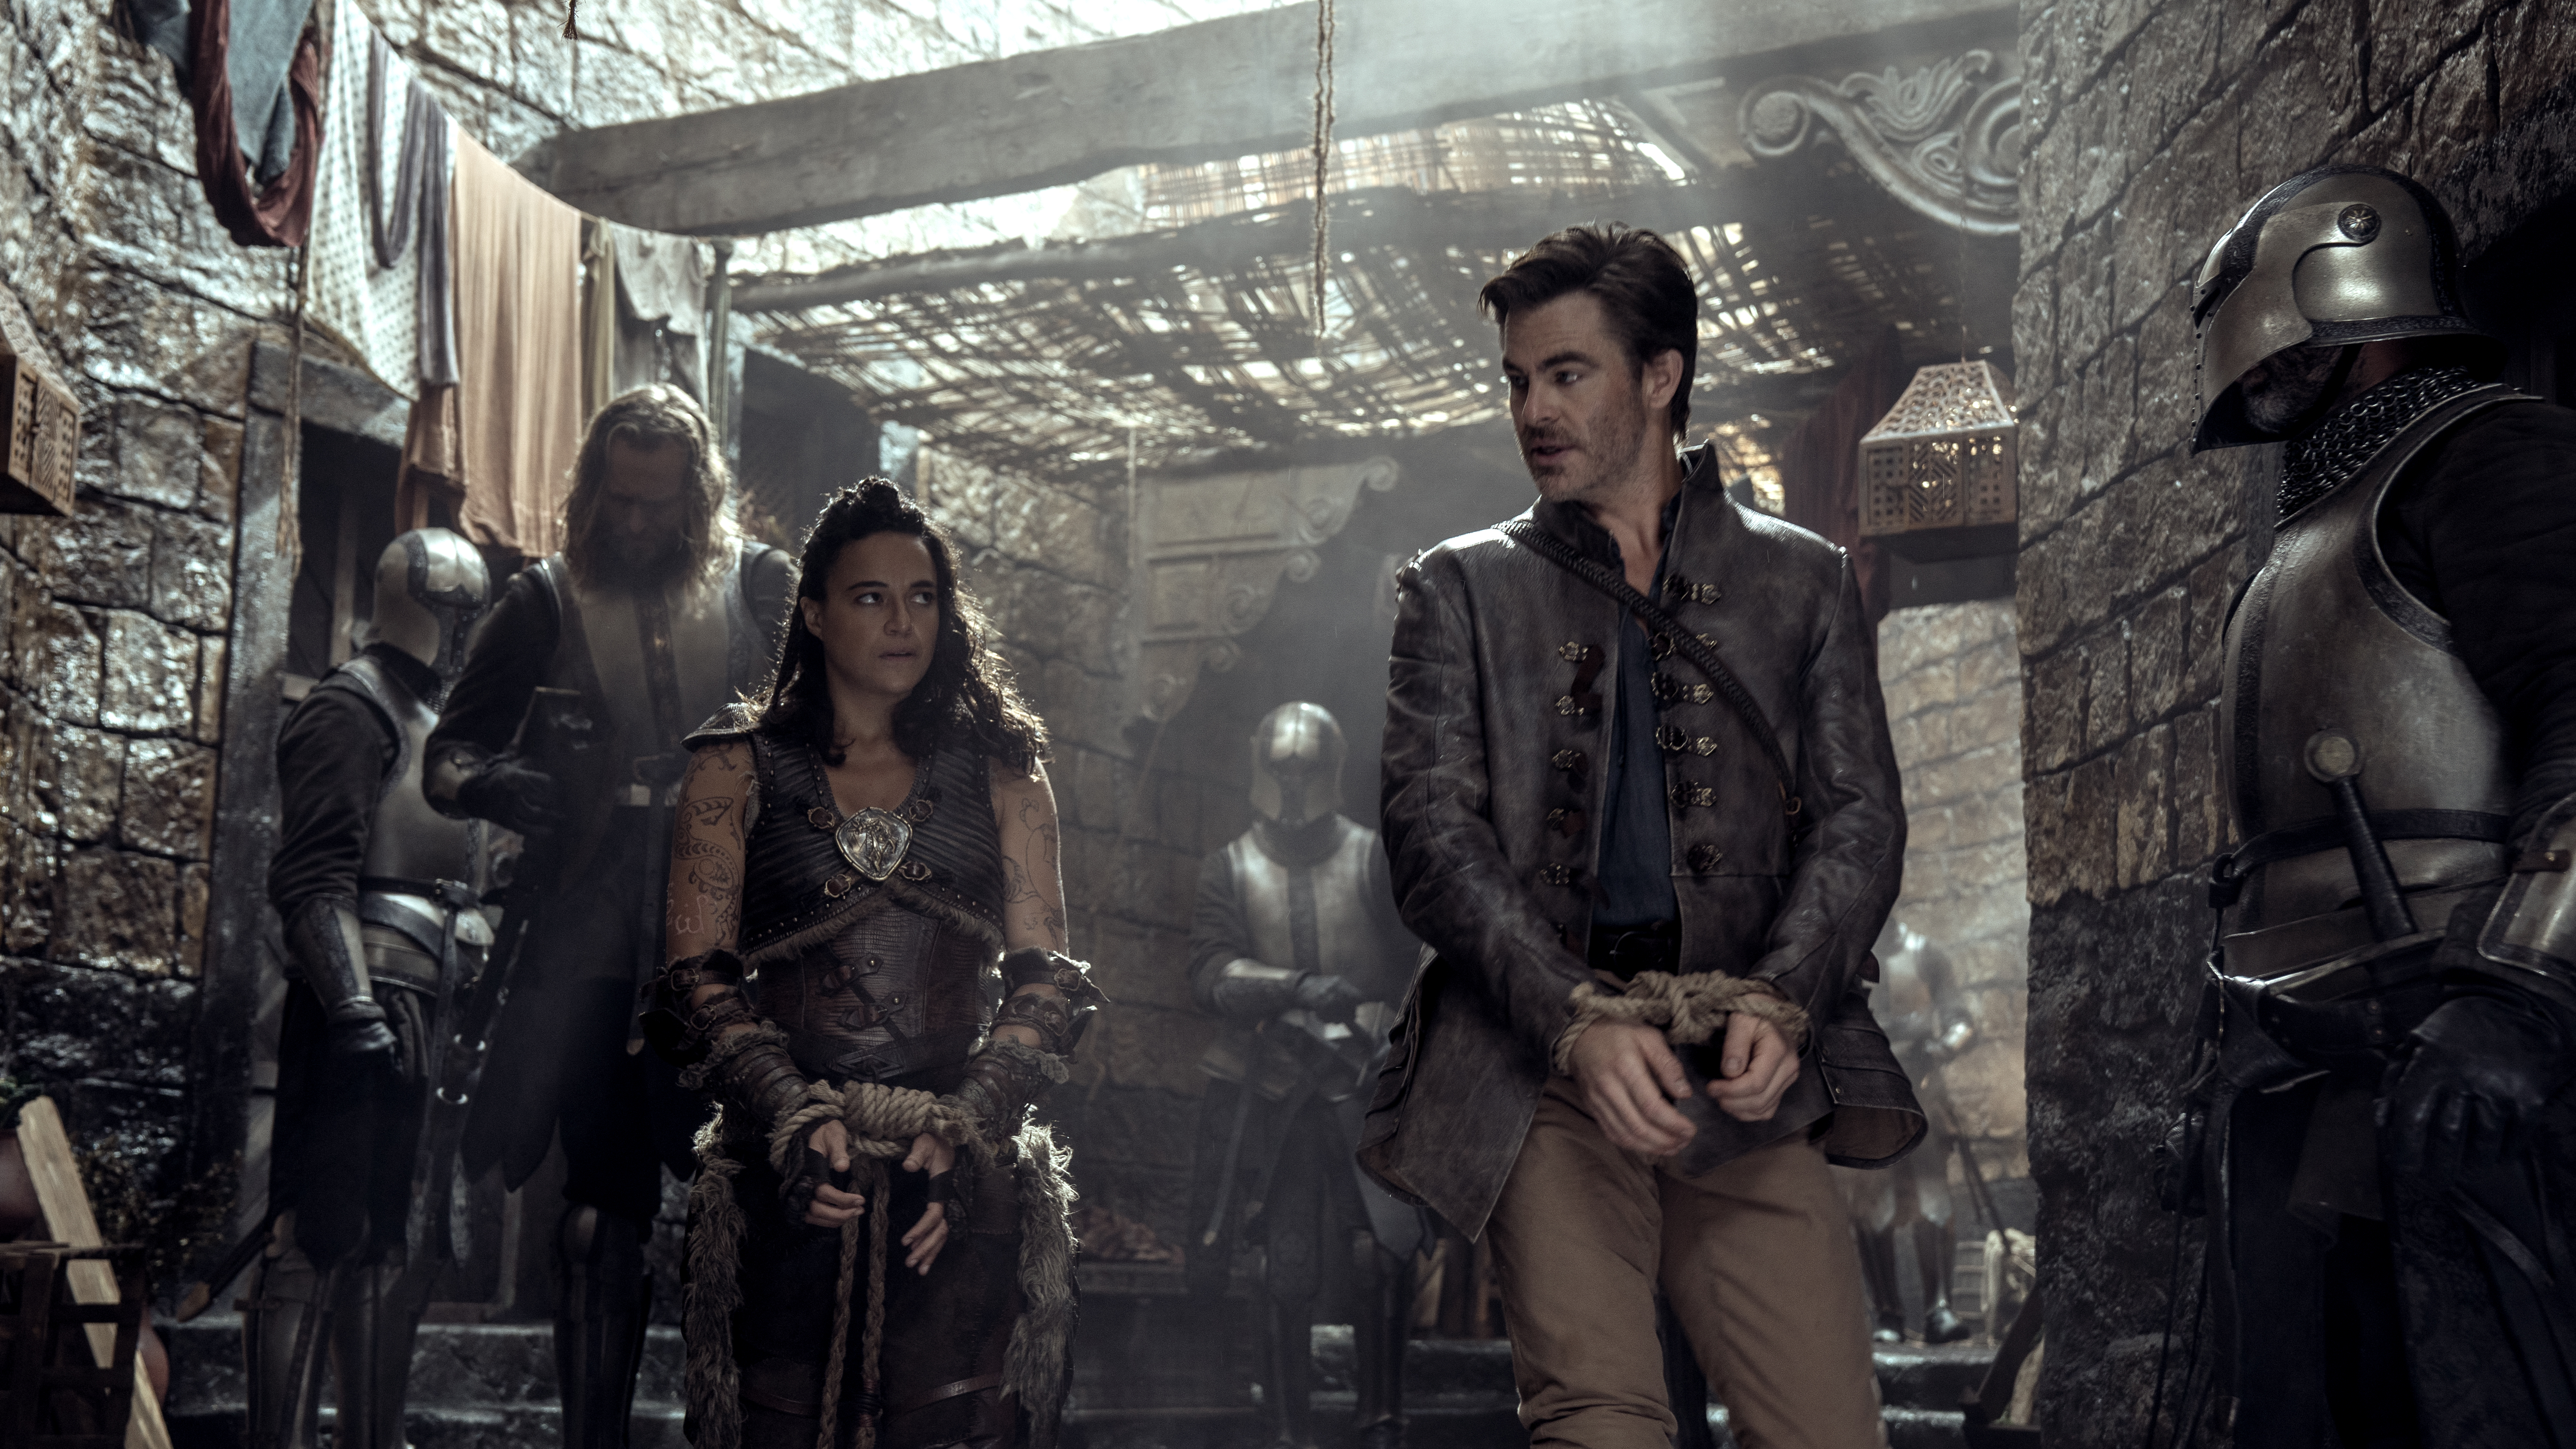 Michelle Rodriguez plays Holga and Chris Pine plays Edgin in 'Dungeons & Dragons: Honor Among Thieves'. Image: Paramount Pictures / eOne / Supplied